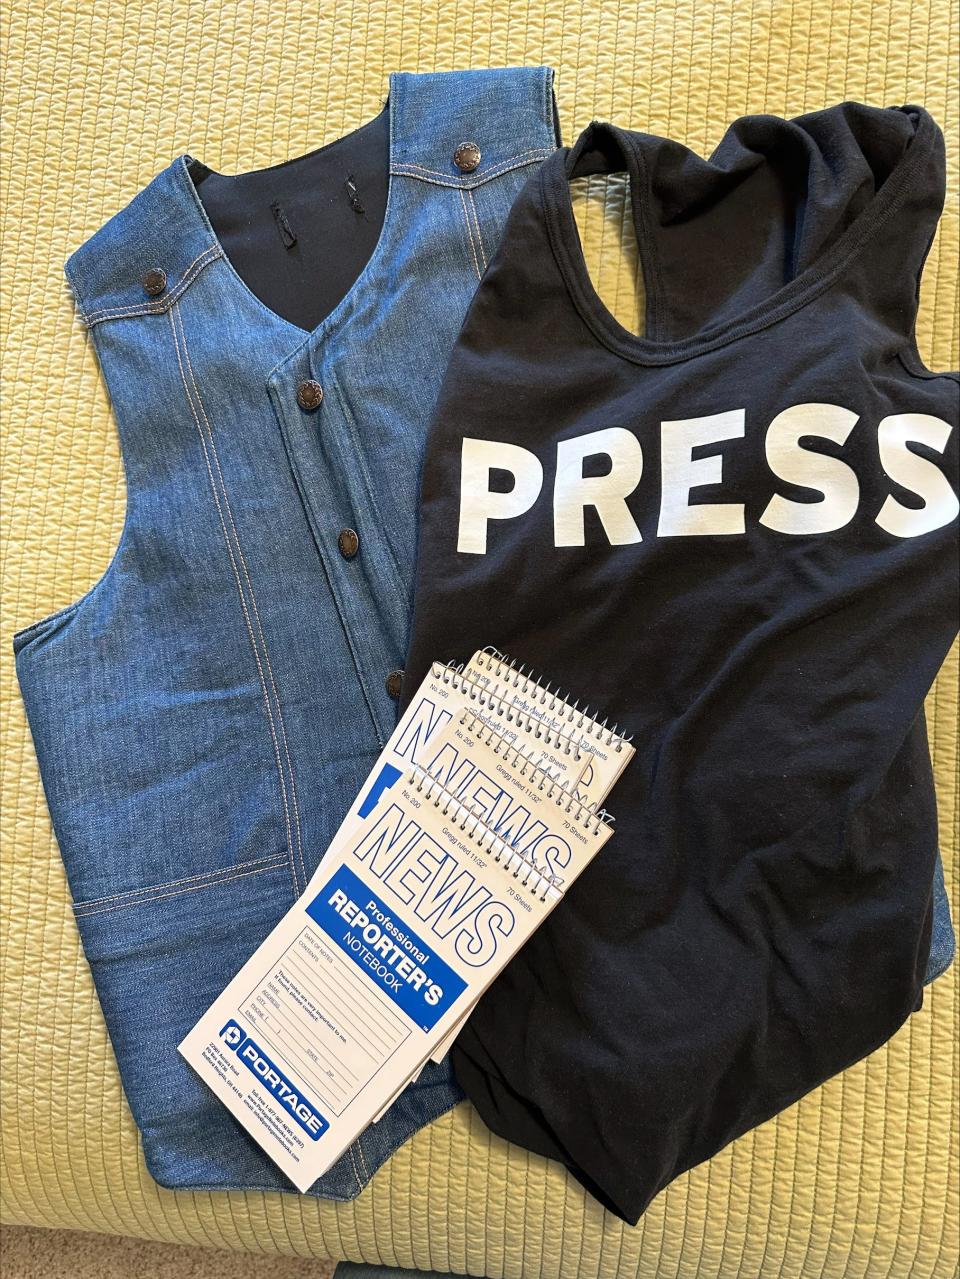 The denim-covered bulletproof vest that Mark Patinkin last wore while covering a war in Beirut decades ago, with an overlay to identify him as a journalist, will offer protection on his current trip to the Middle East to report on the Israel-Hamas war.